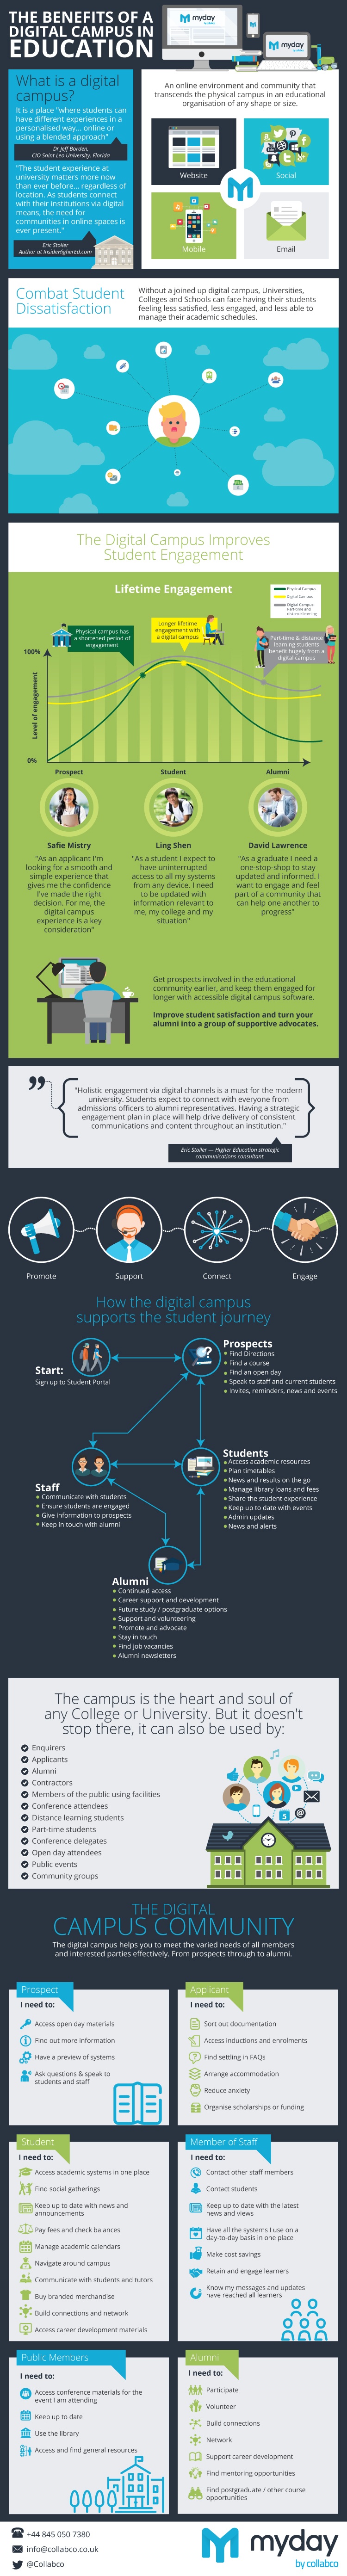 The Benefits of a Digital Campus in Education Infographic